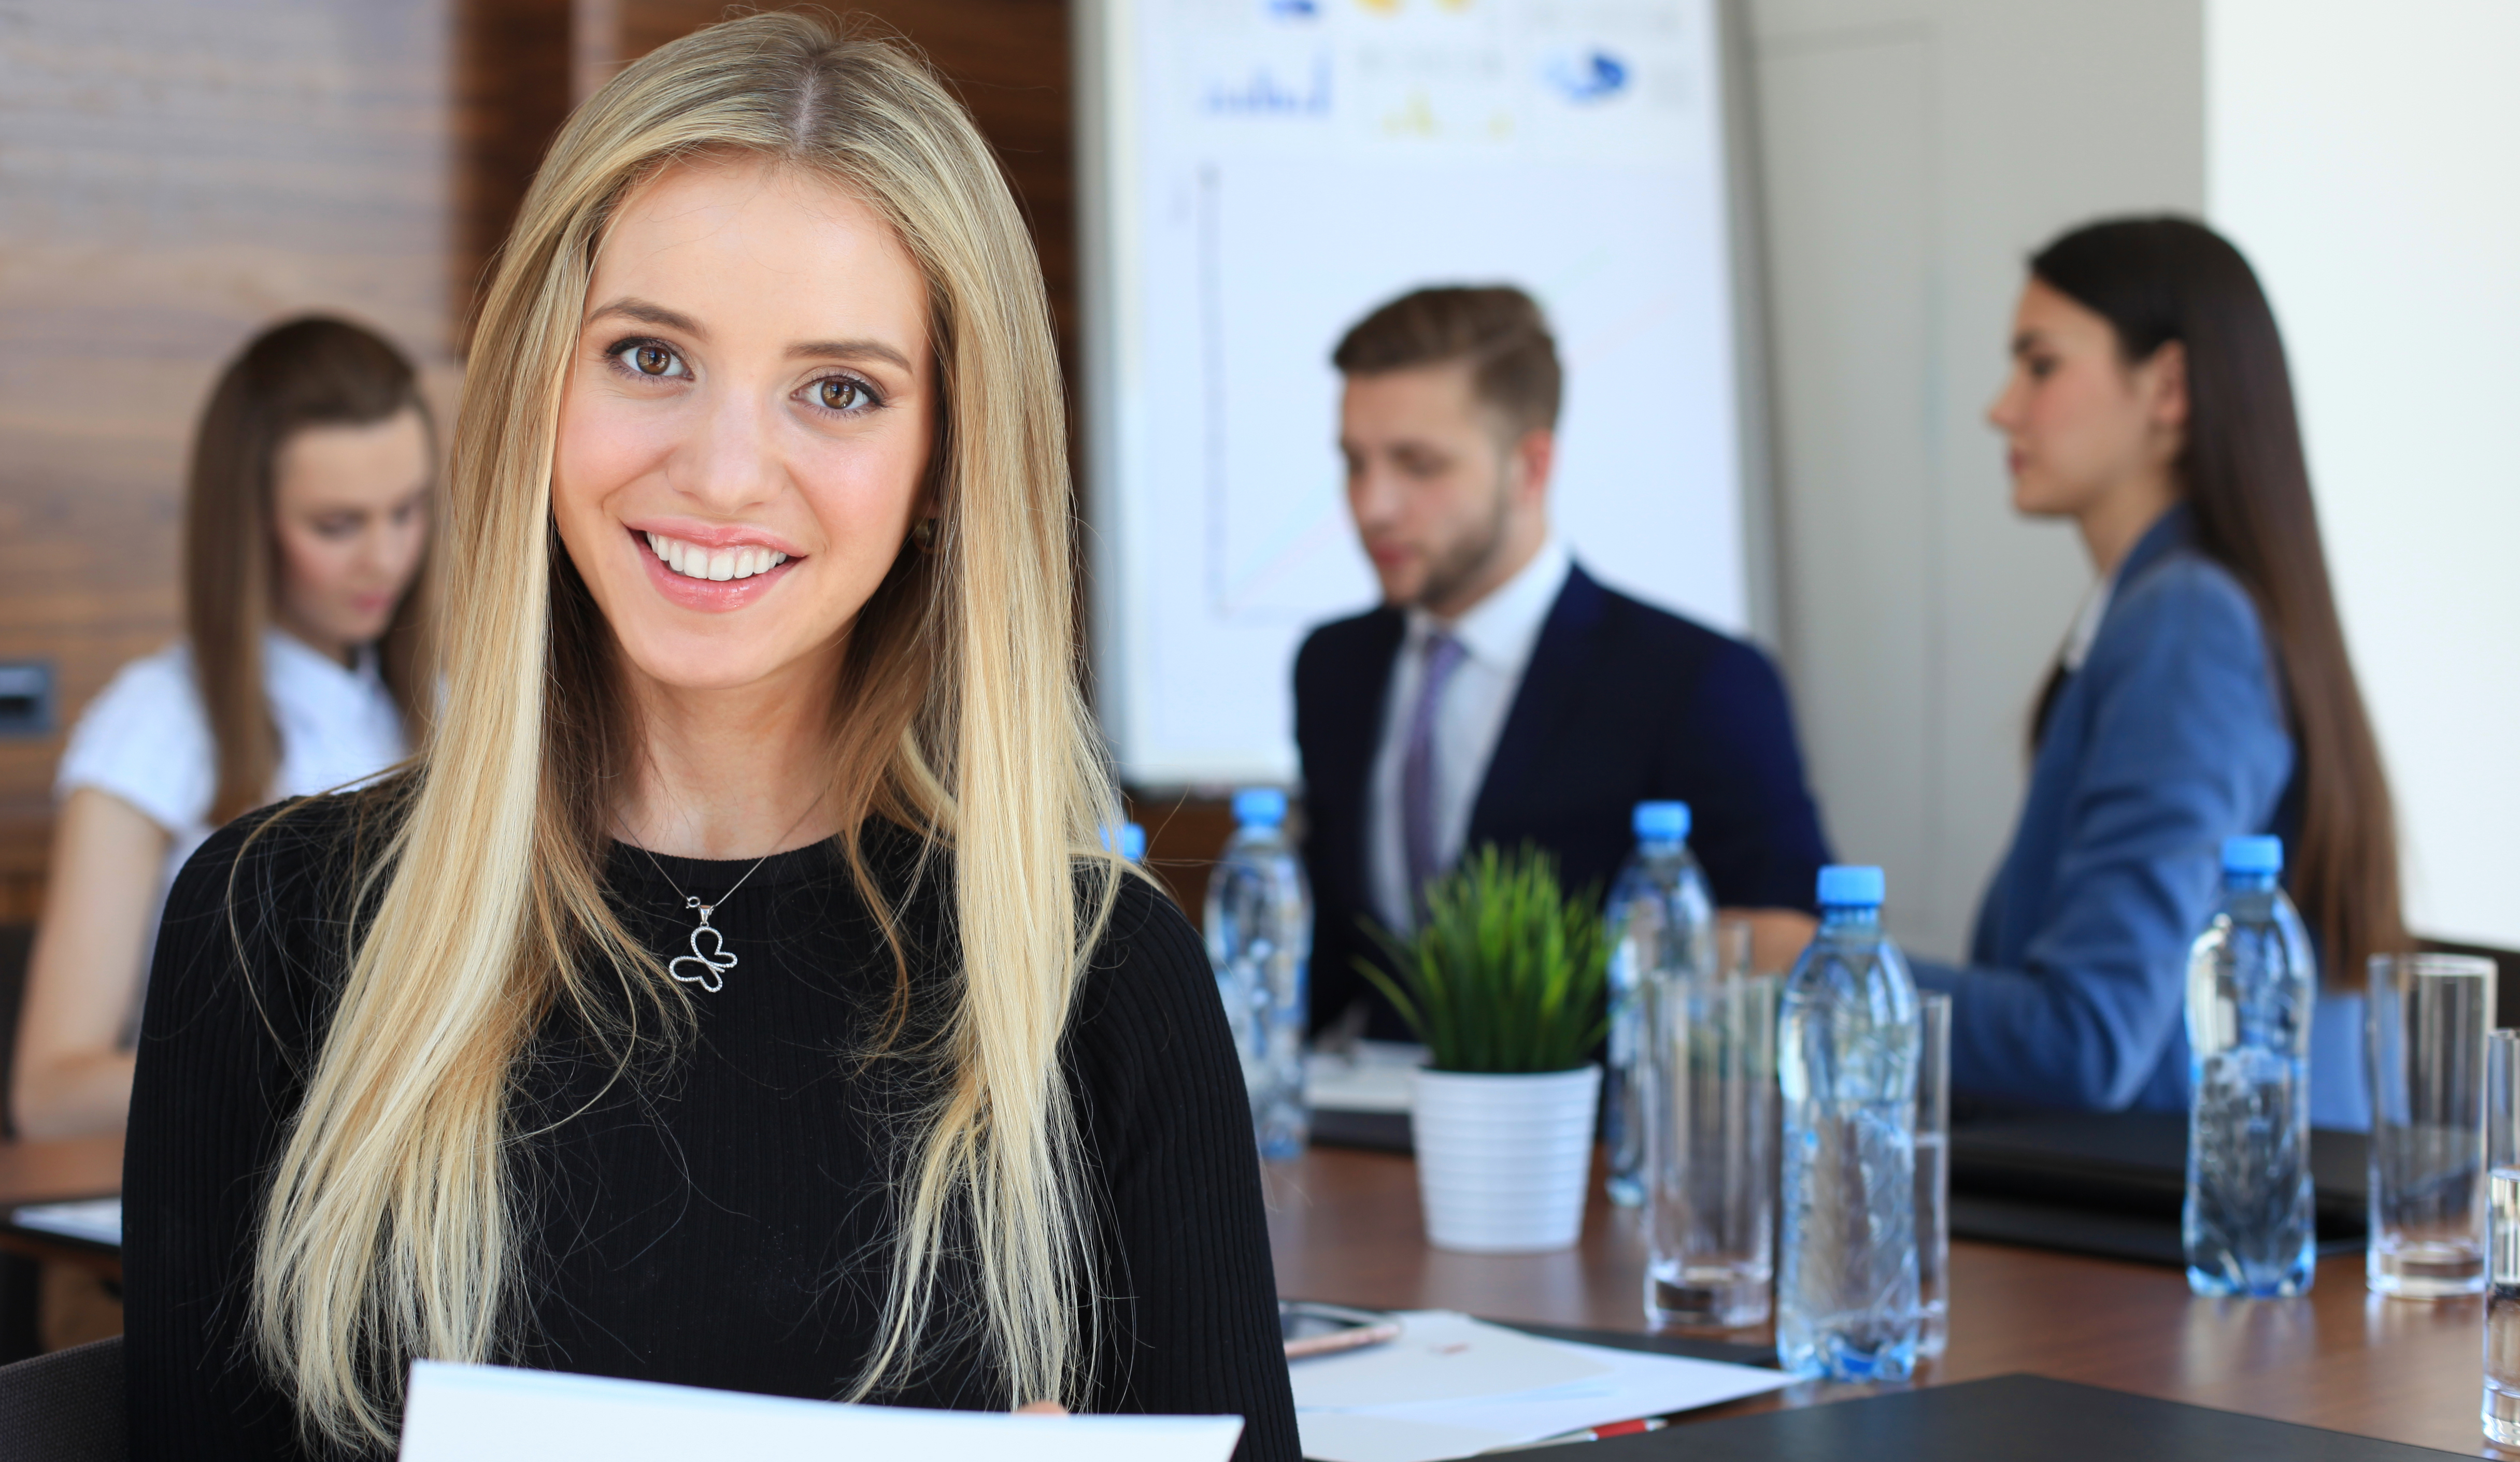 What Makes a Great Executive Assistant